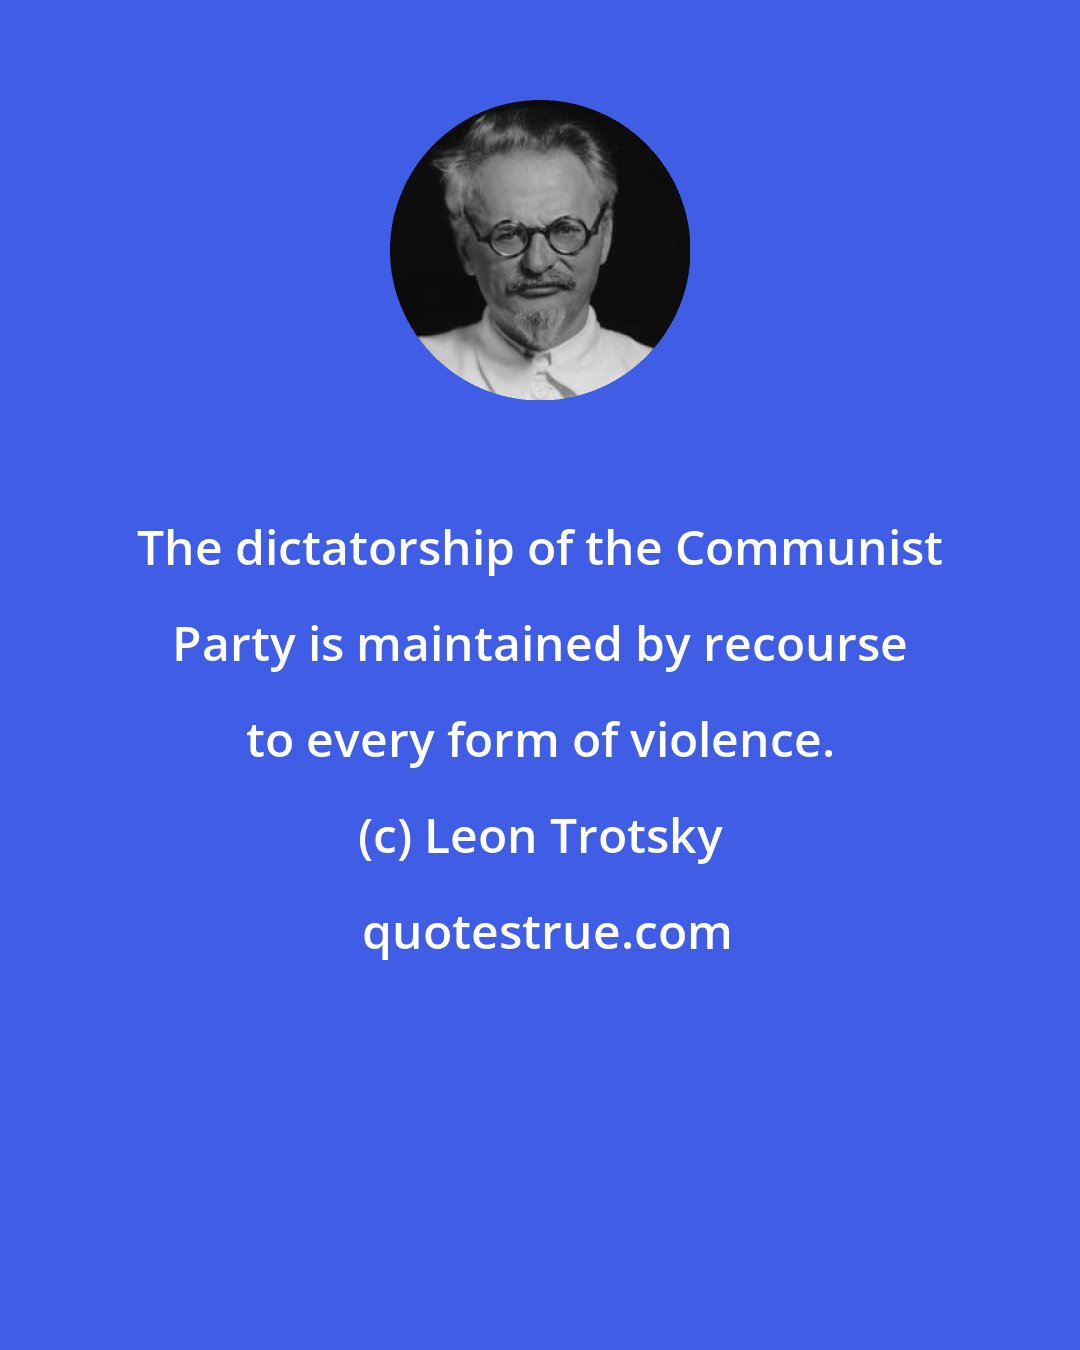 Leon Trotsky: The dictatorship of the Communist Party is maintained by recourse to every form of violence.